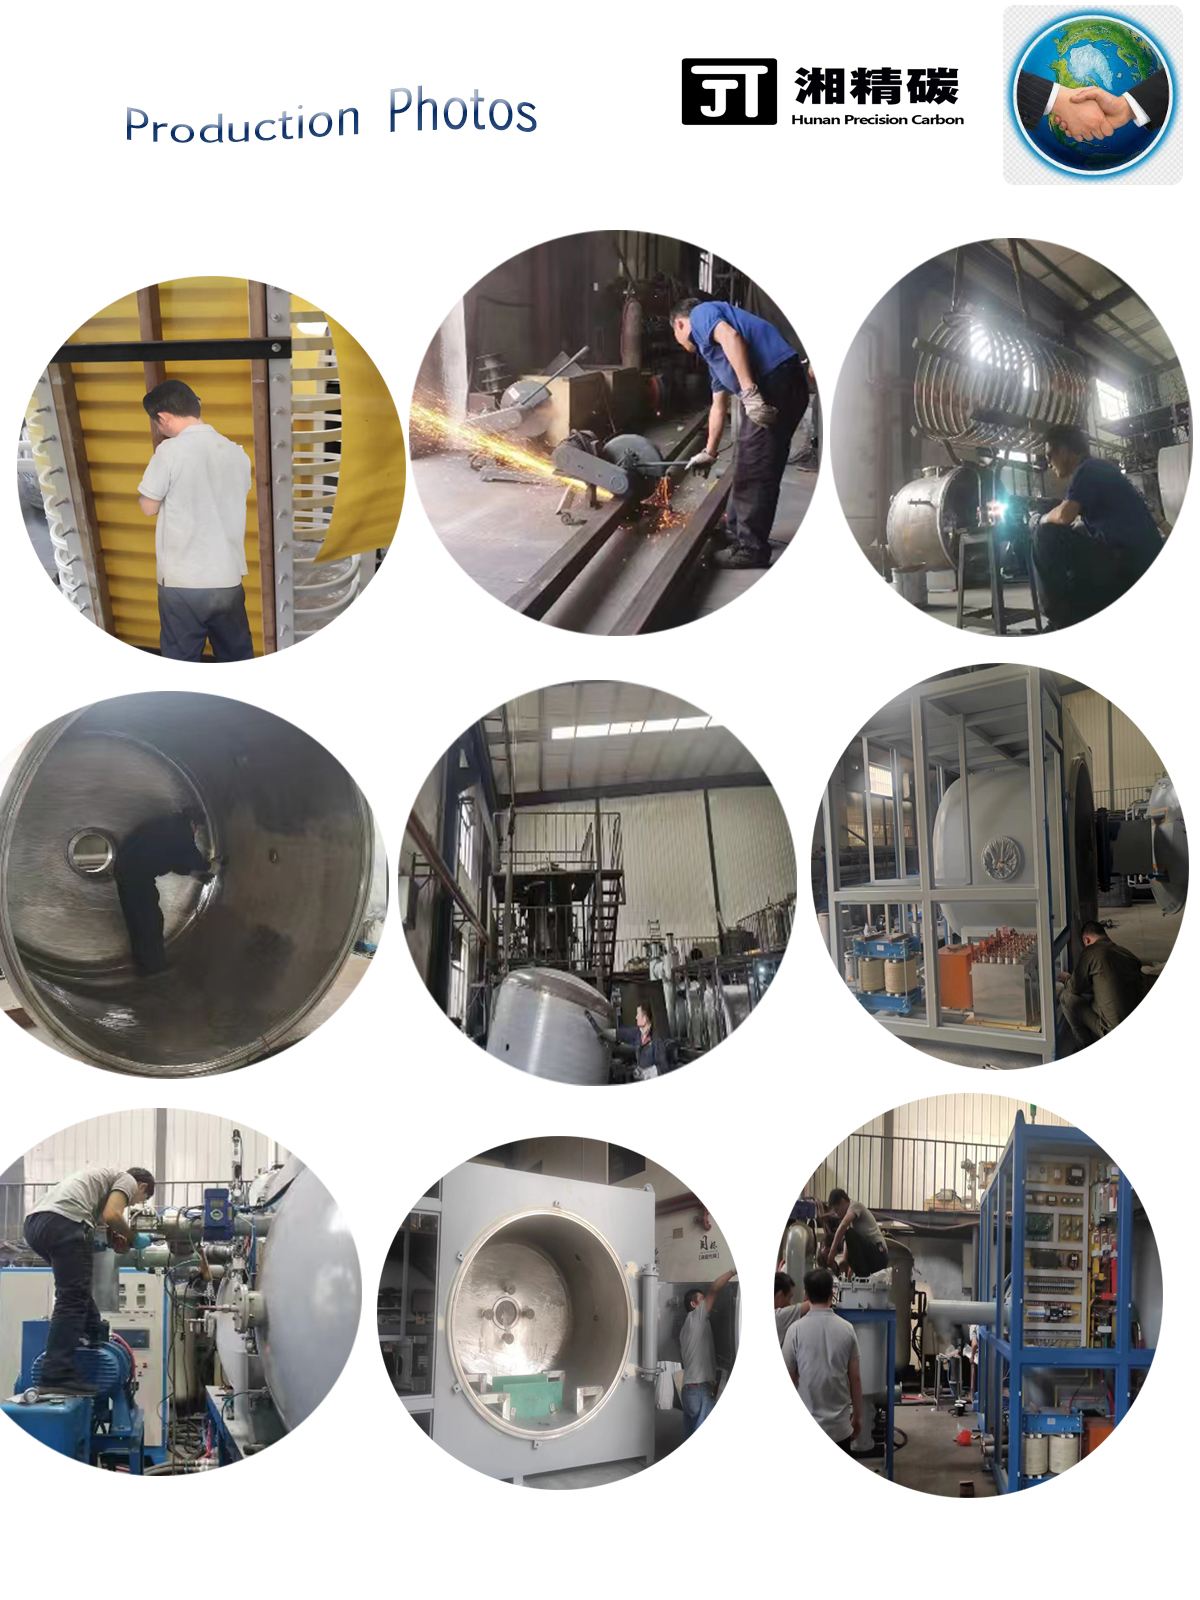 China graphitization furnace factory high temperature treatment and graphitization of graphene, carbon fiber products